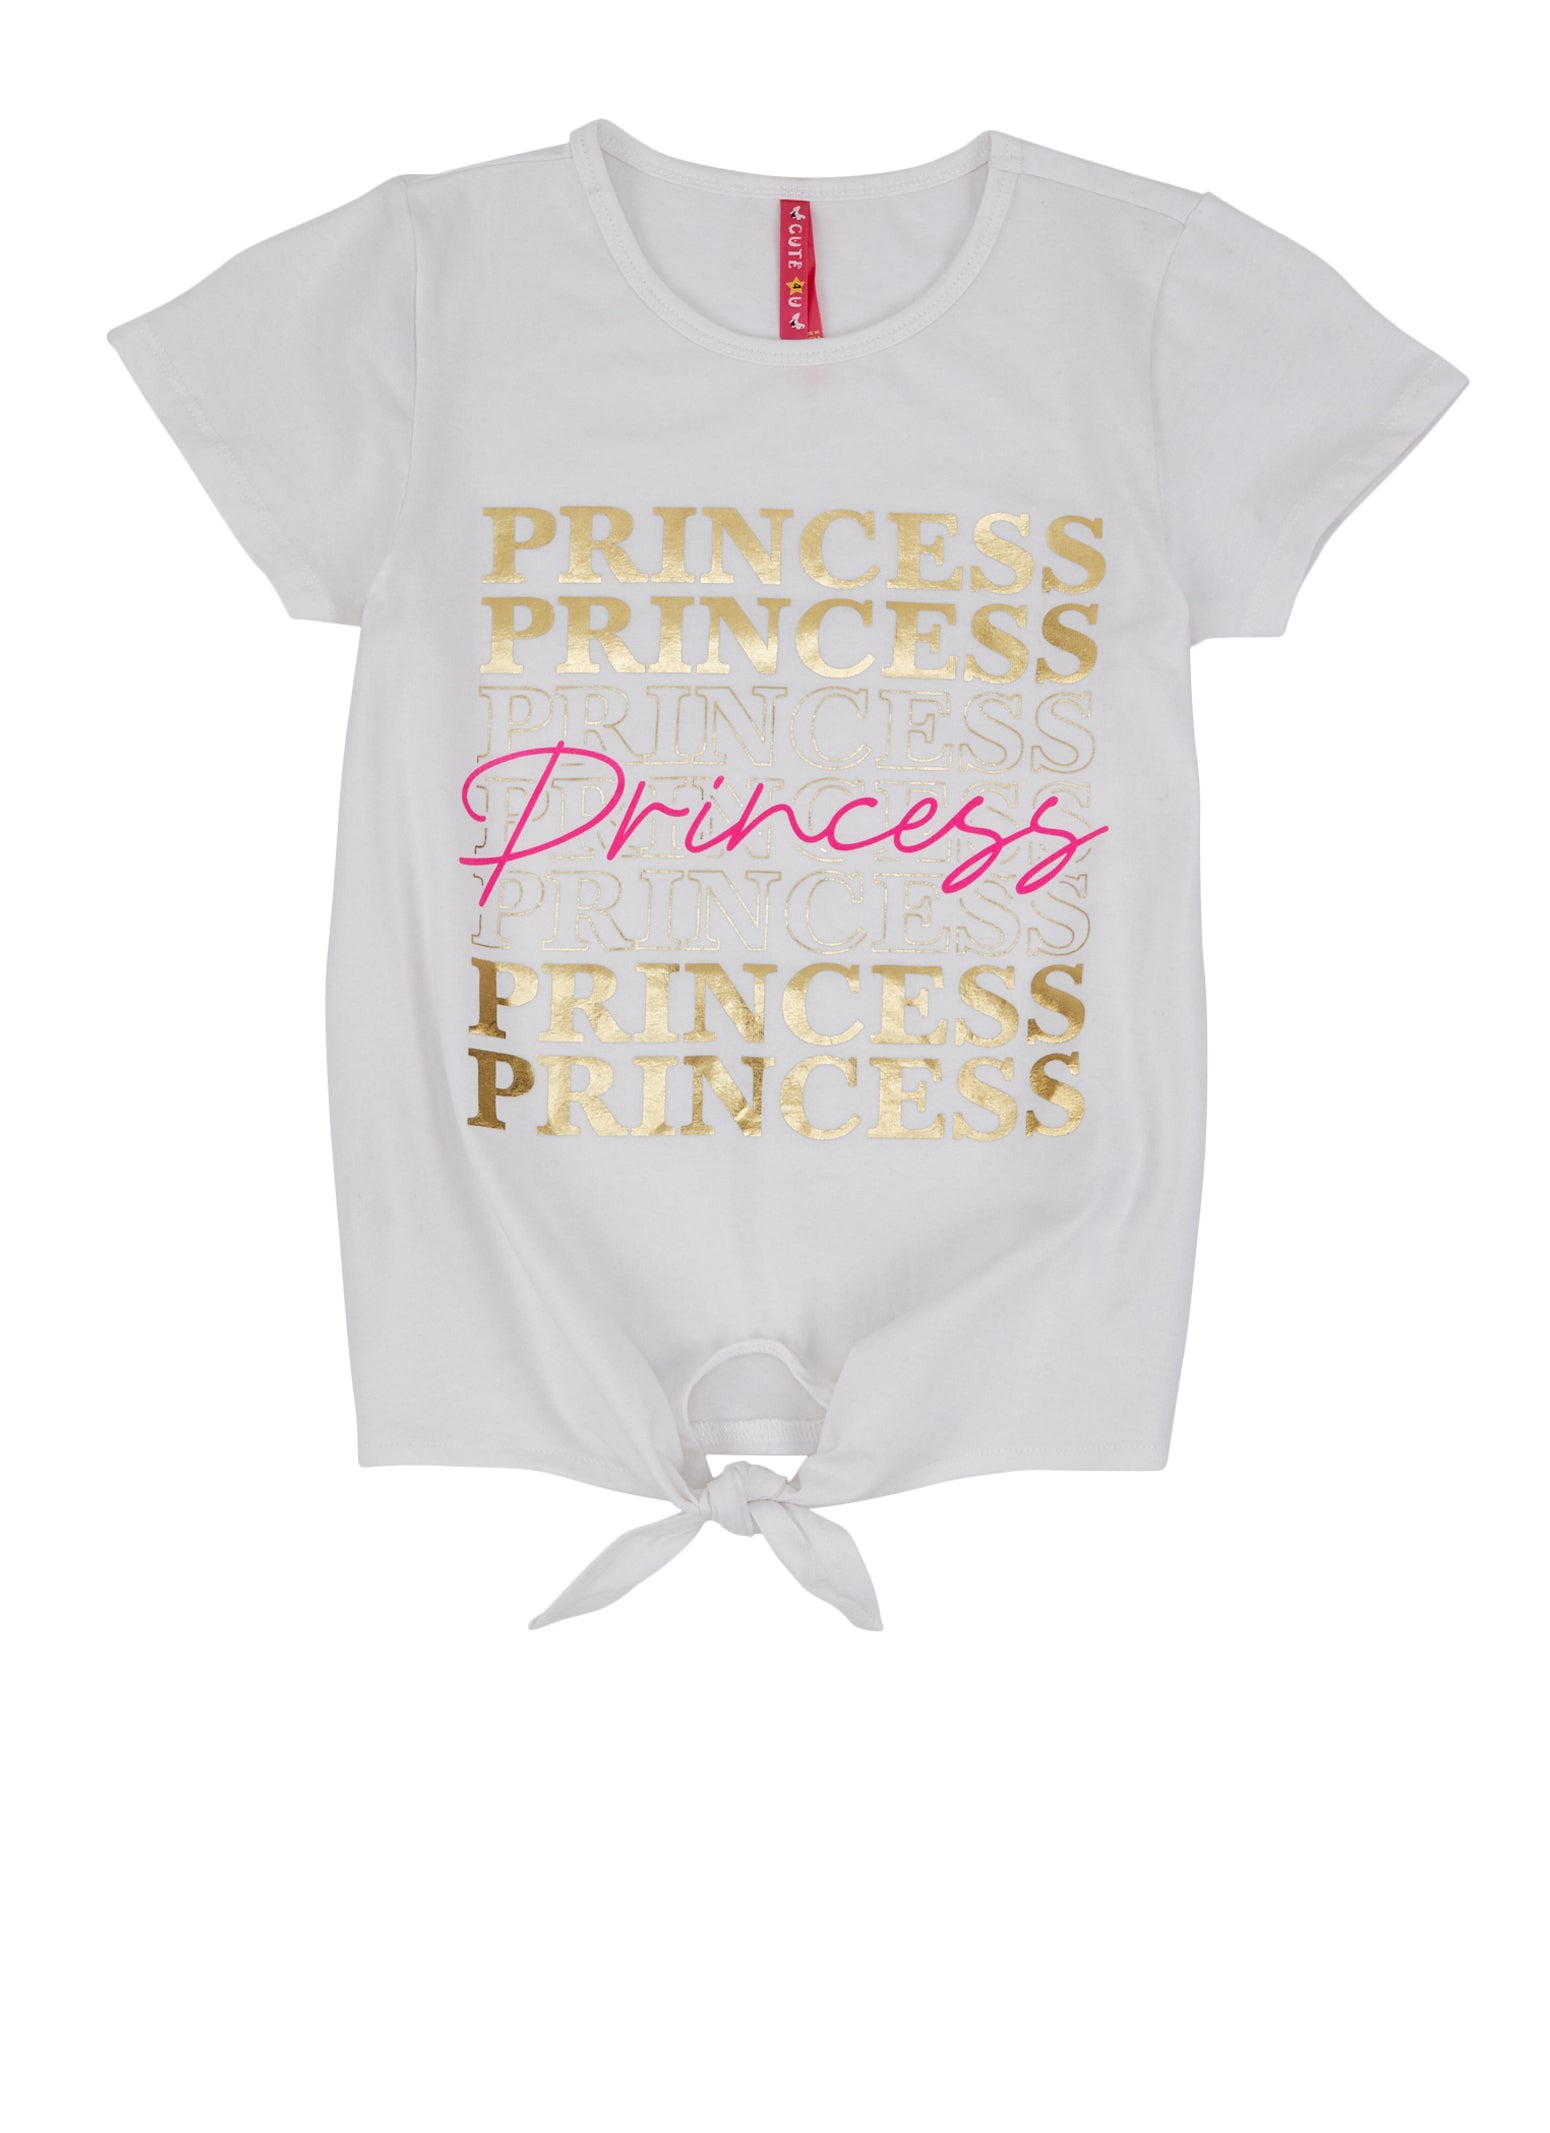 Girls Tie Front Princess Foil Screen Graphic Tee, White, Size 10-12